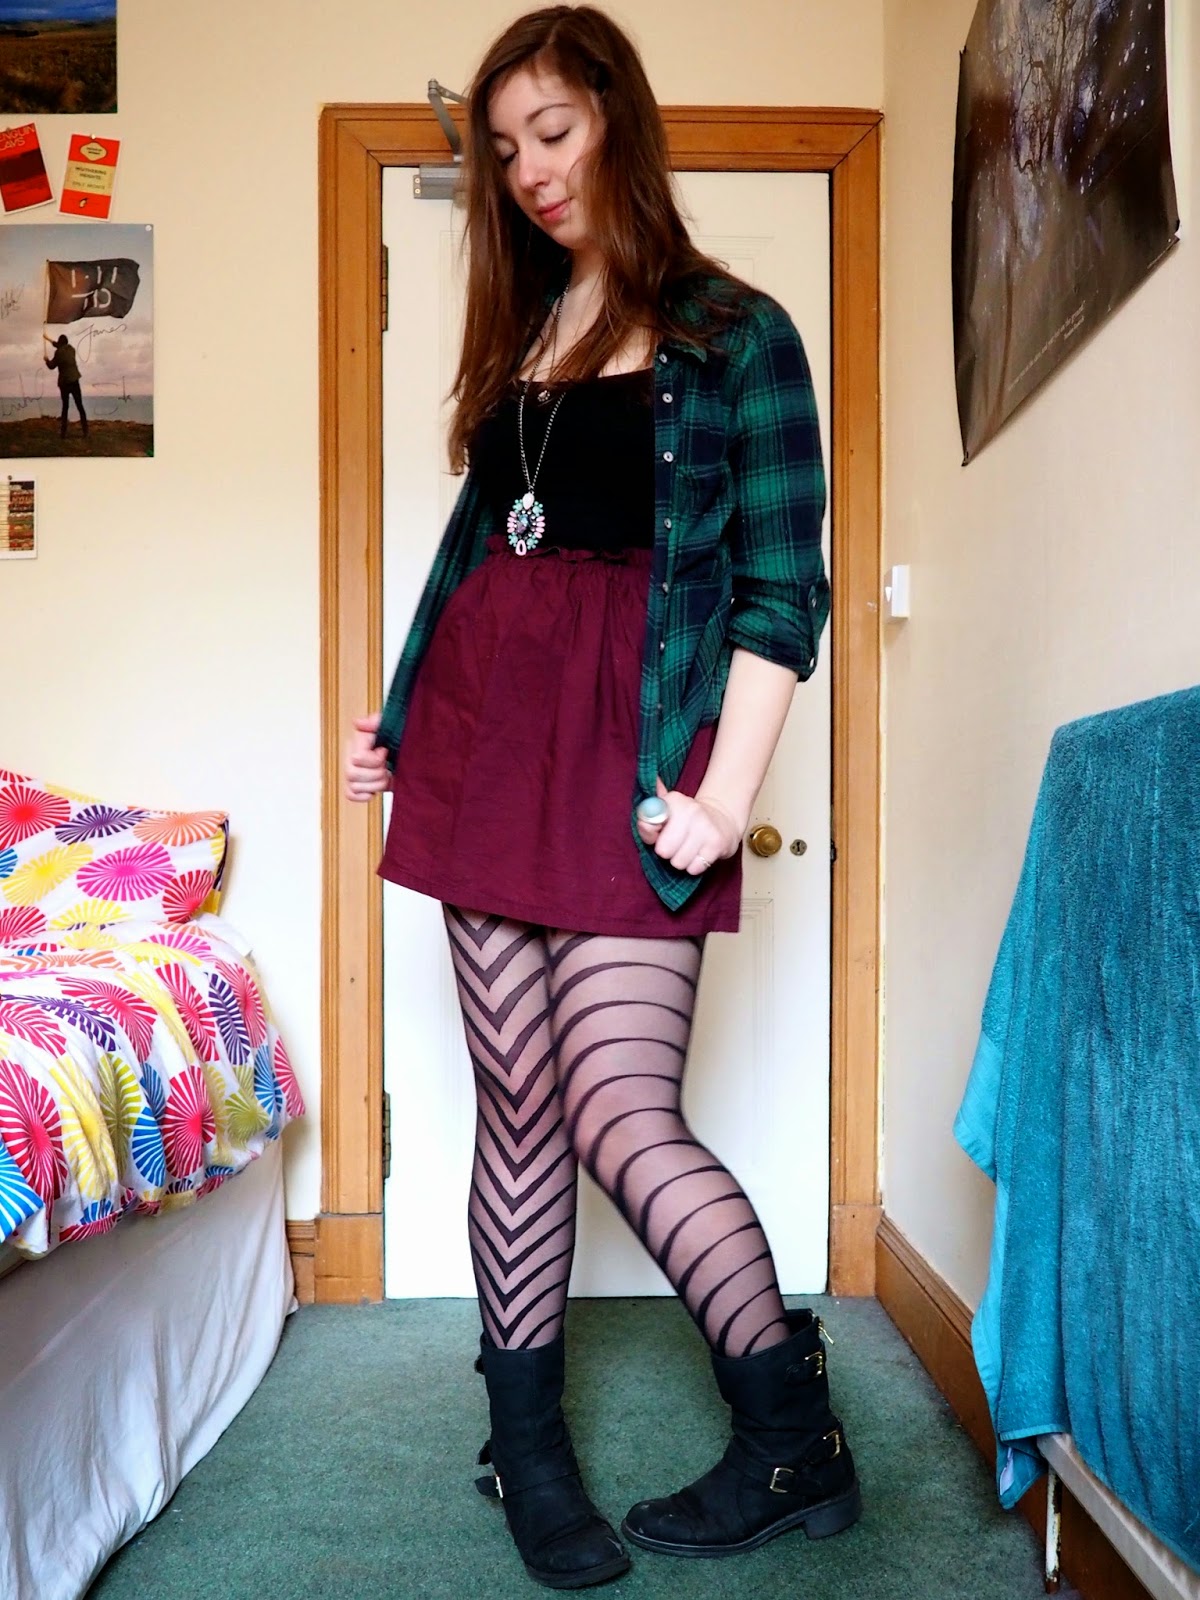 Statement pieces outfit | Green checked shirt, black vest, purple skirt, patterned tights & black biker boots